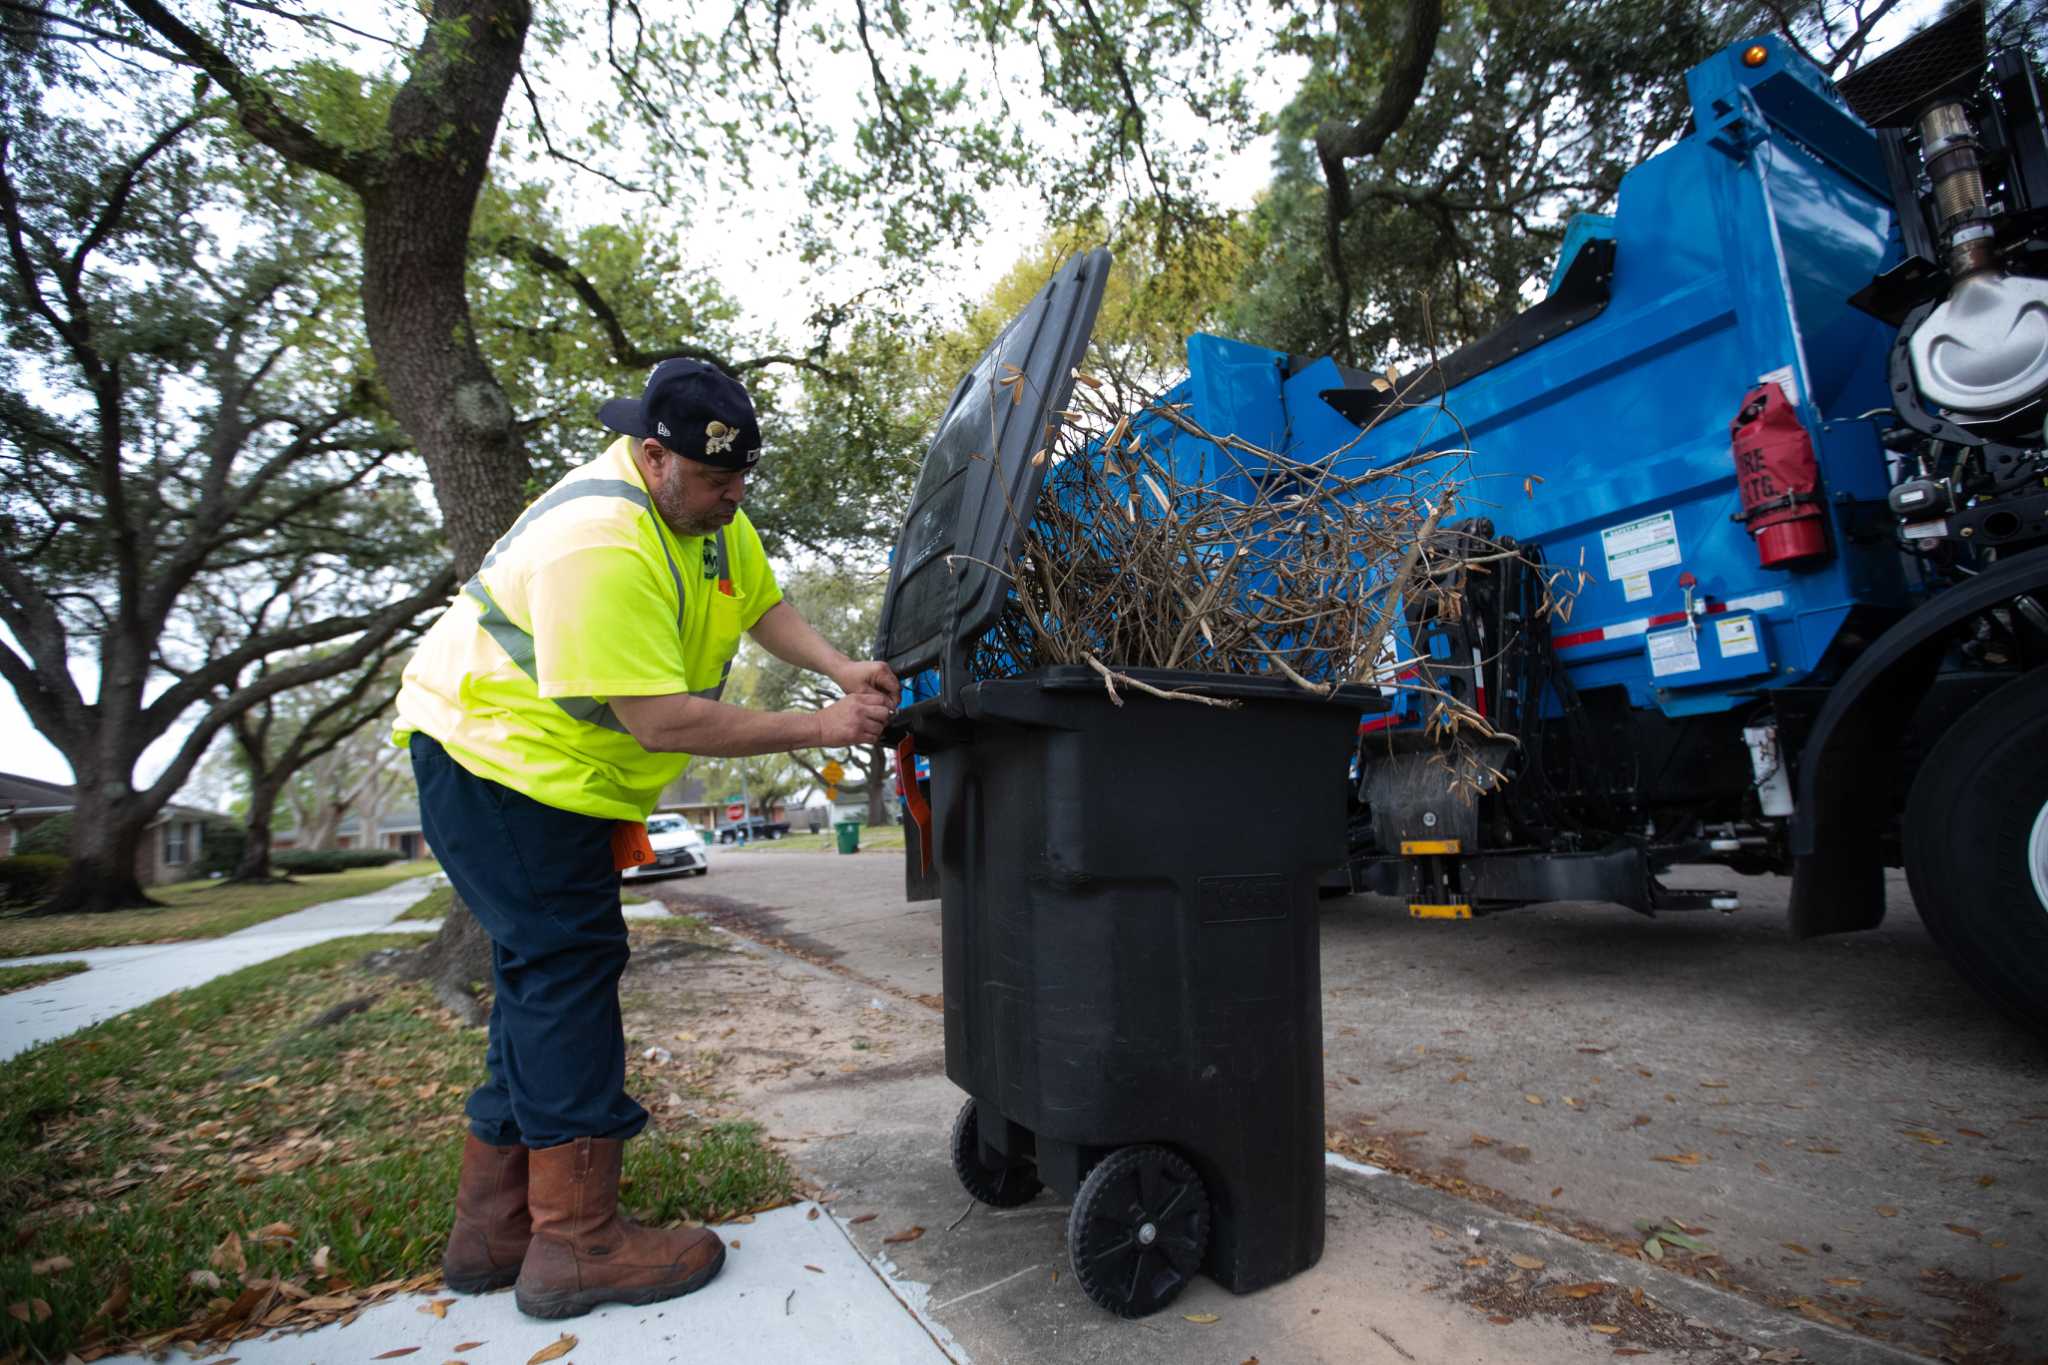 Houston’s trash trucks are constantly behind schedule. Why?